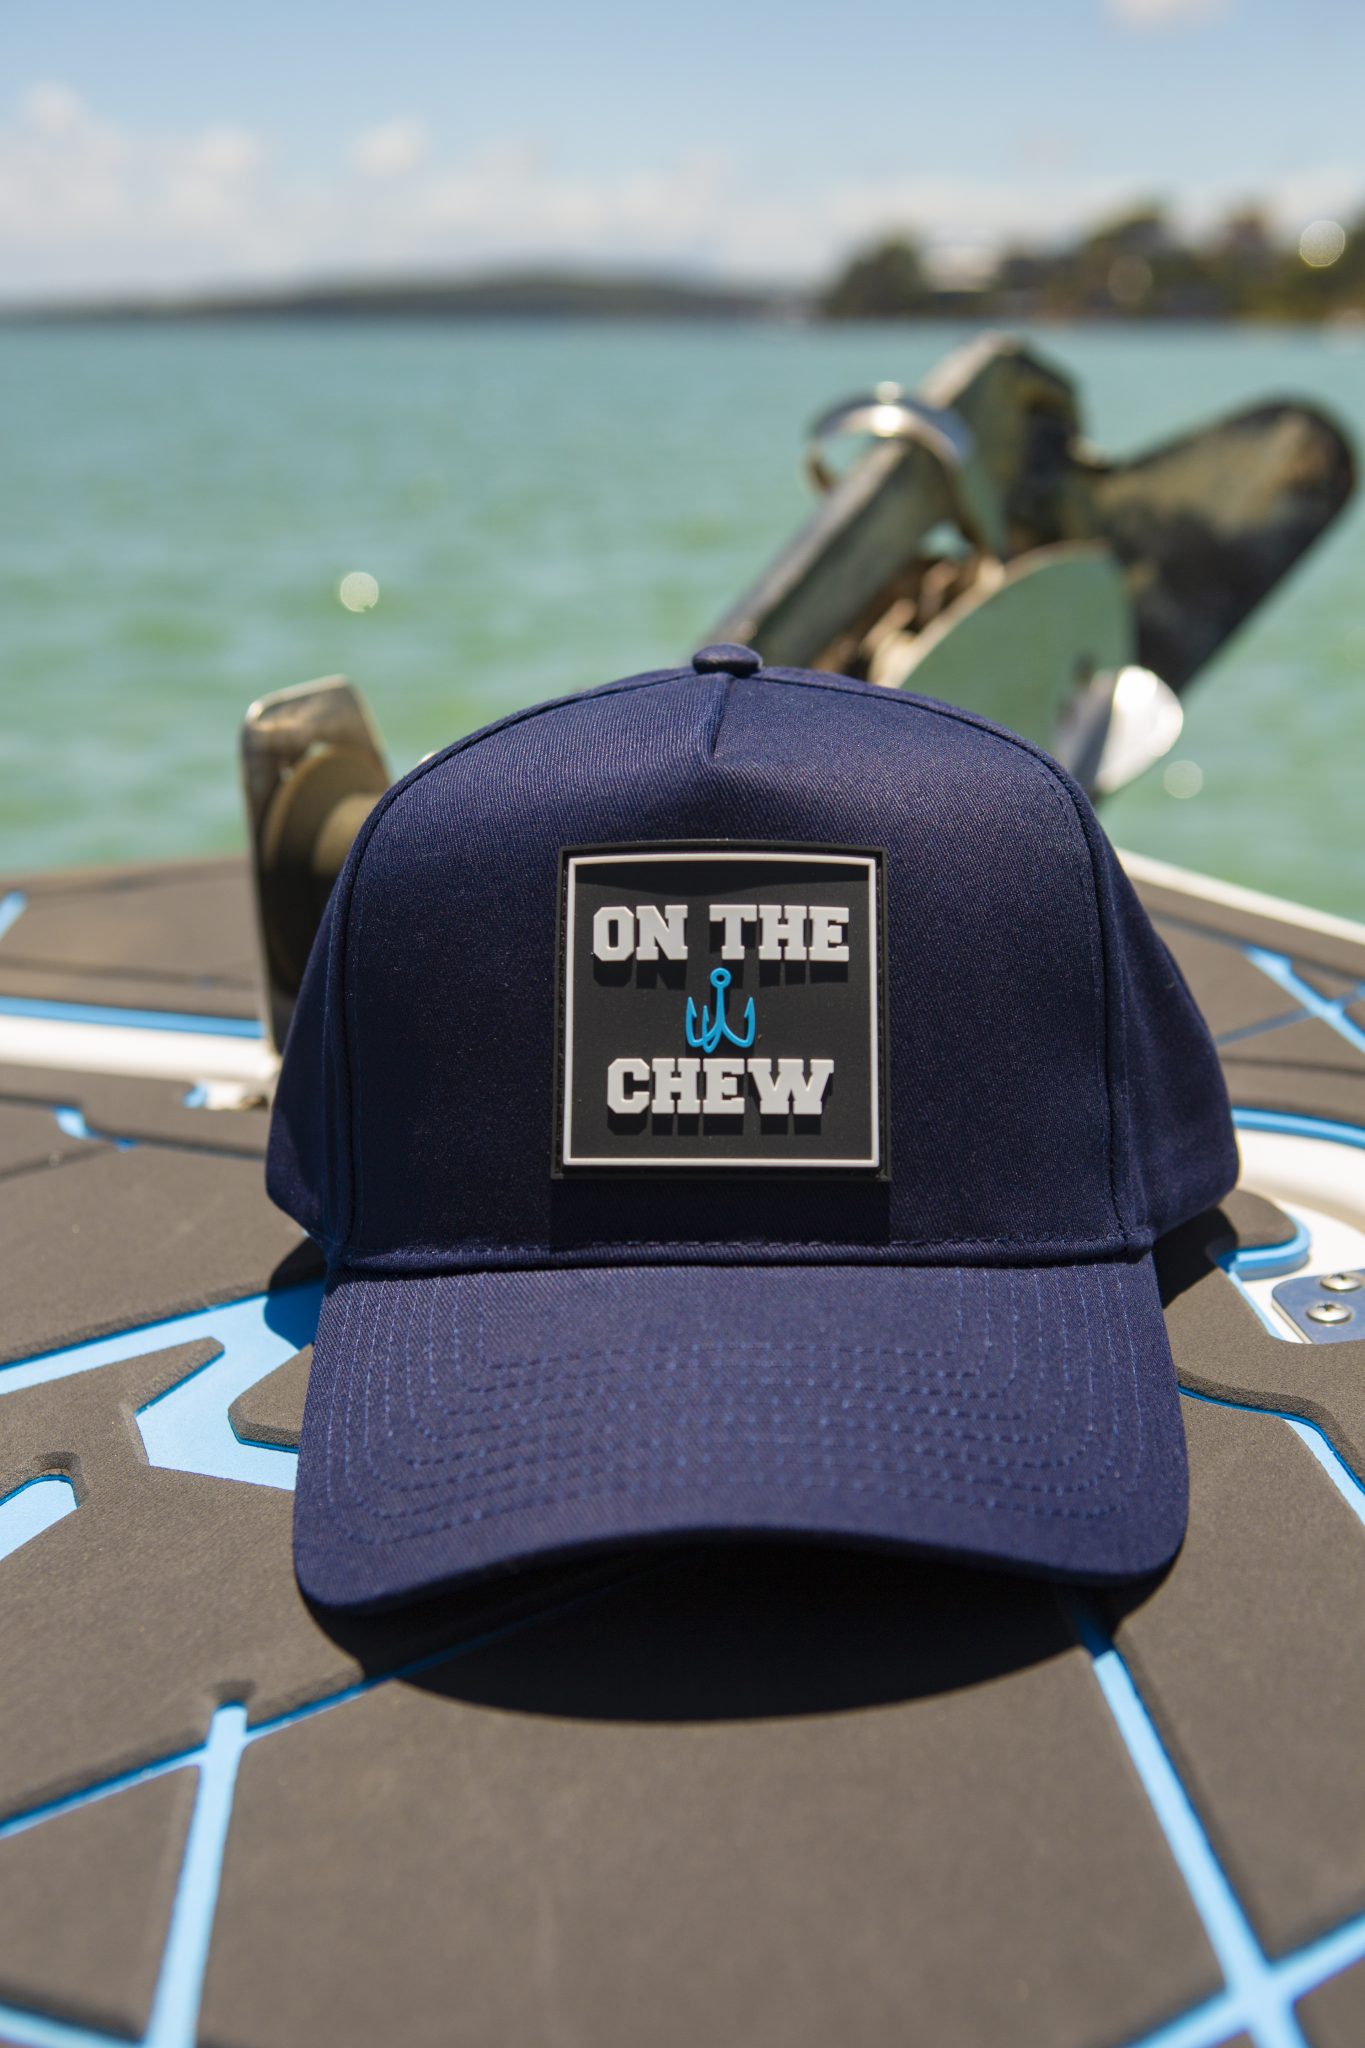 original 11 Fishing and lifestyle clothing. On The Chew